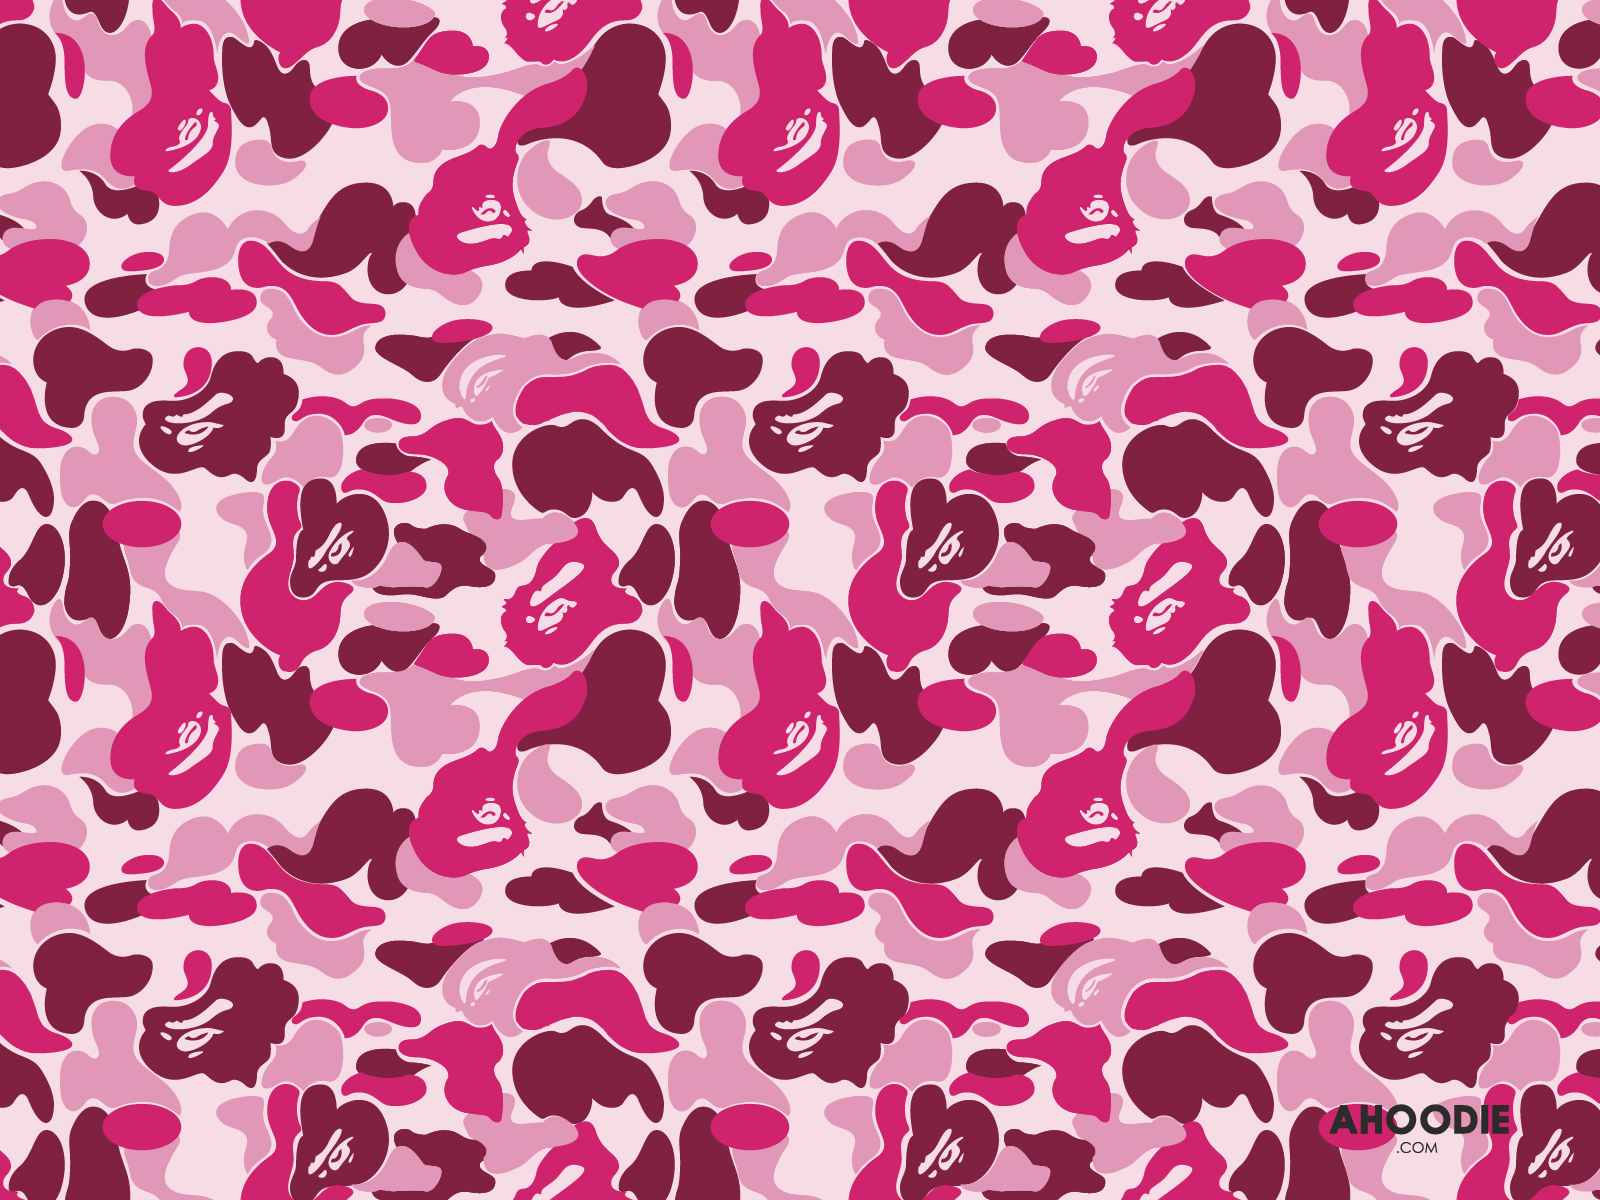 Camo onCamo Wallpaper Pink Camo and Wallpaper For Iphone